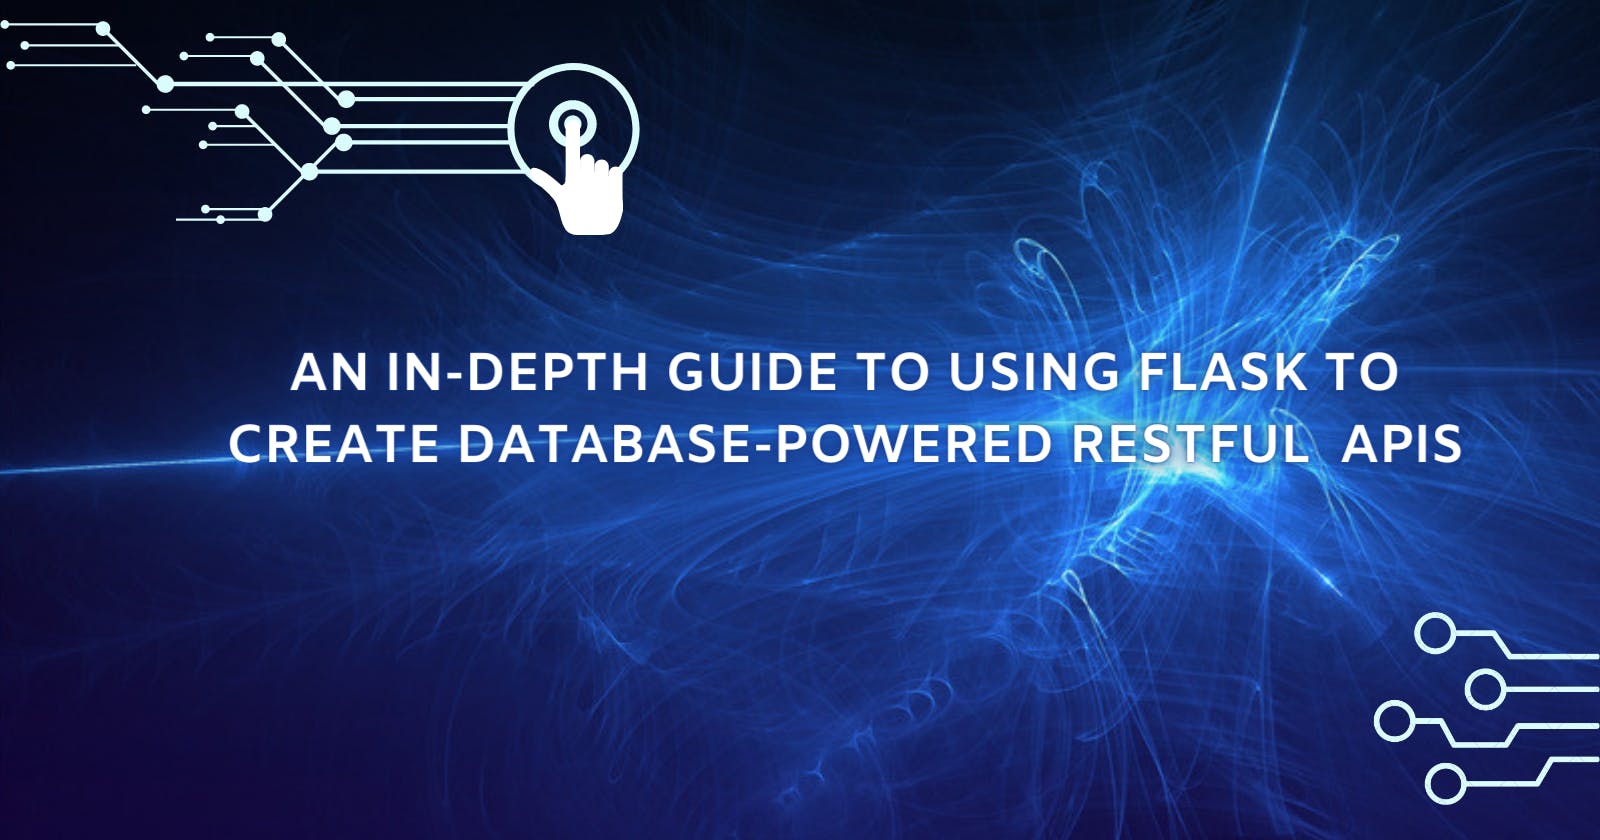 An In-depth Guide to Using Flask to Create Database-powered RESTFUL APIs